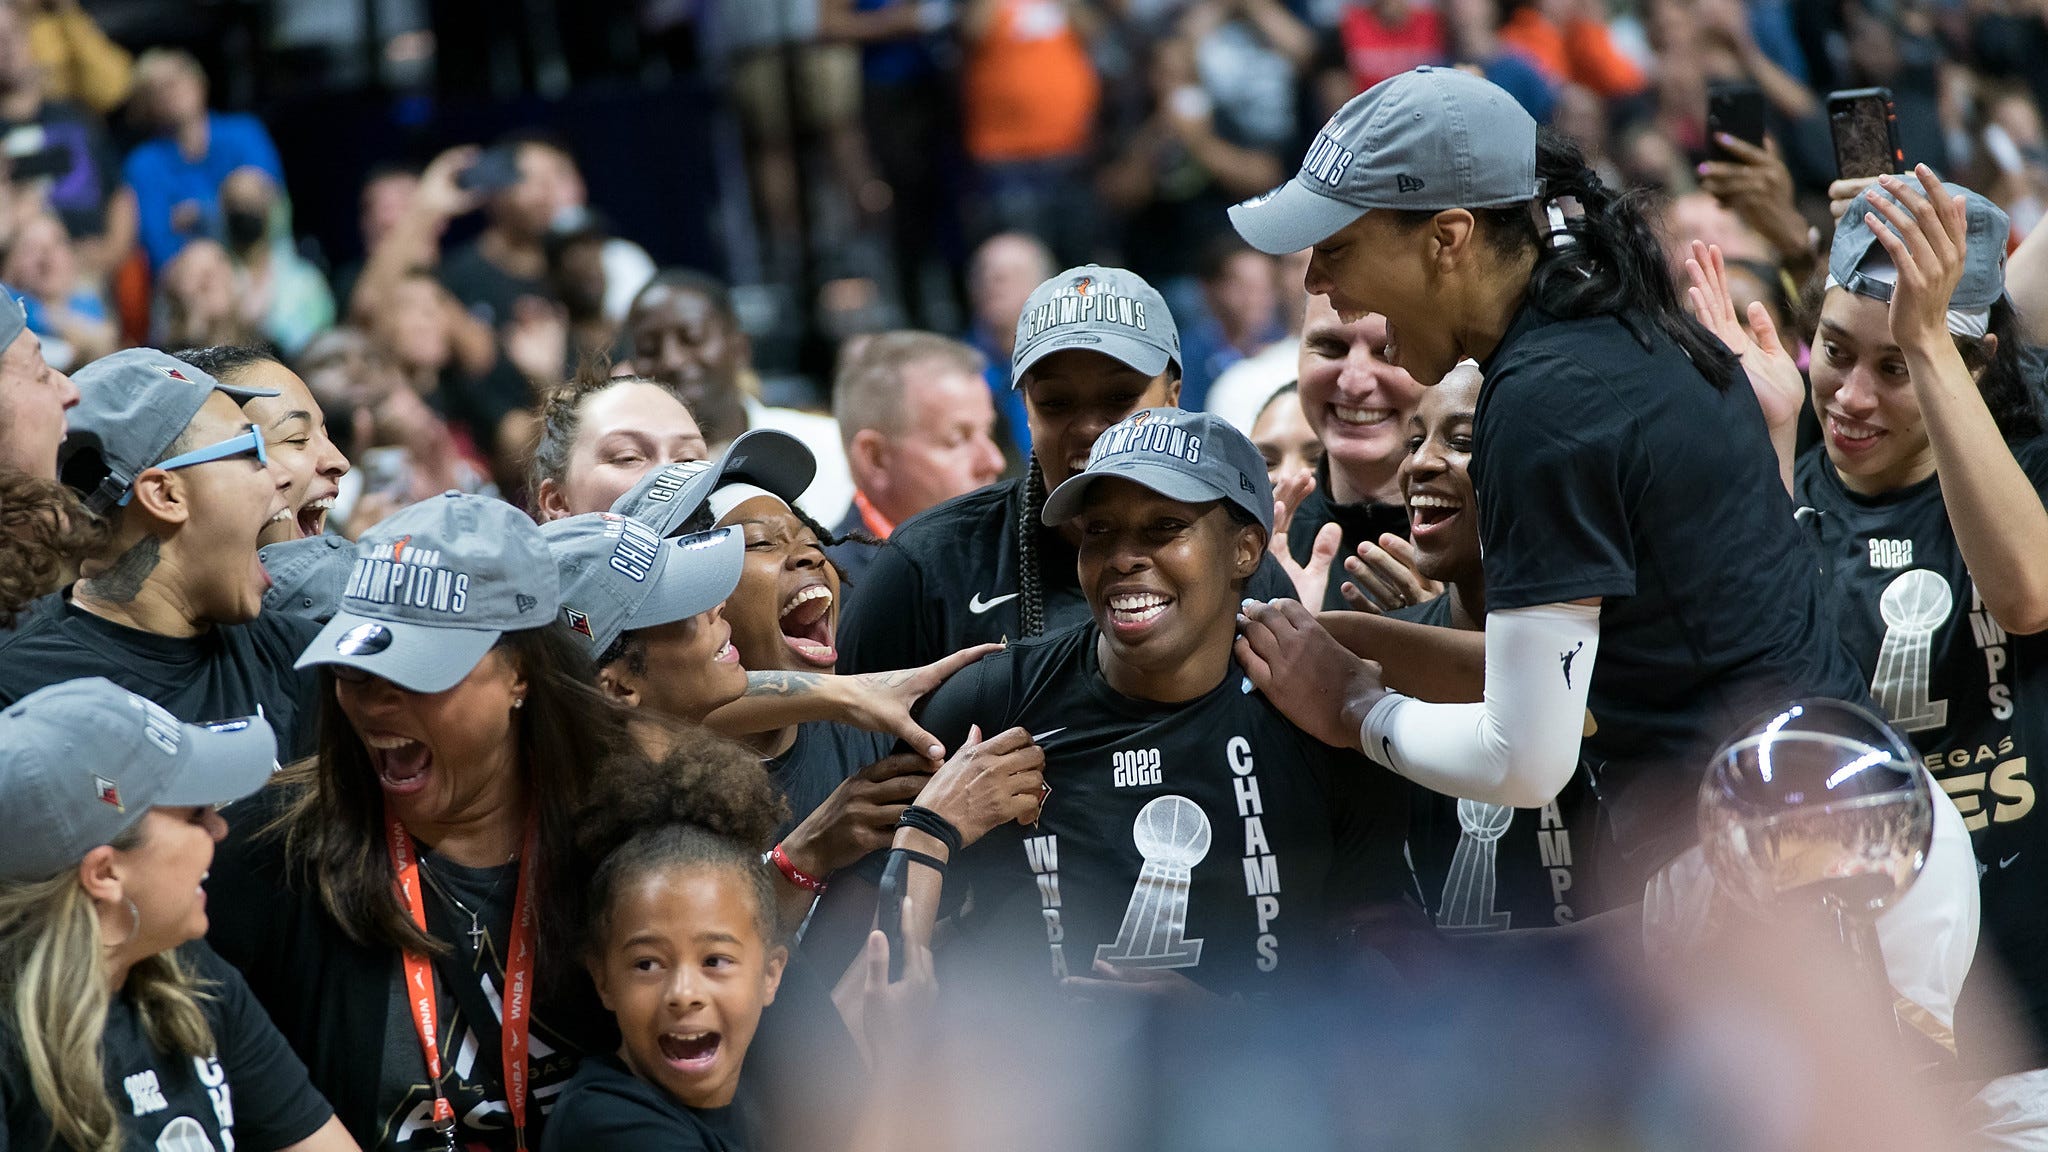 Las Vegas Aces WNBA champions gear: Where to get shirts, hats for